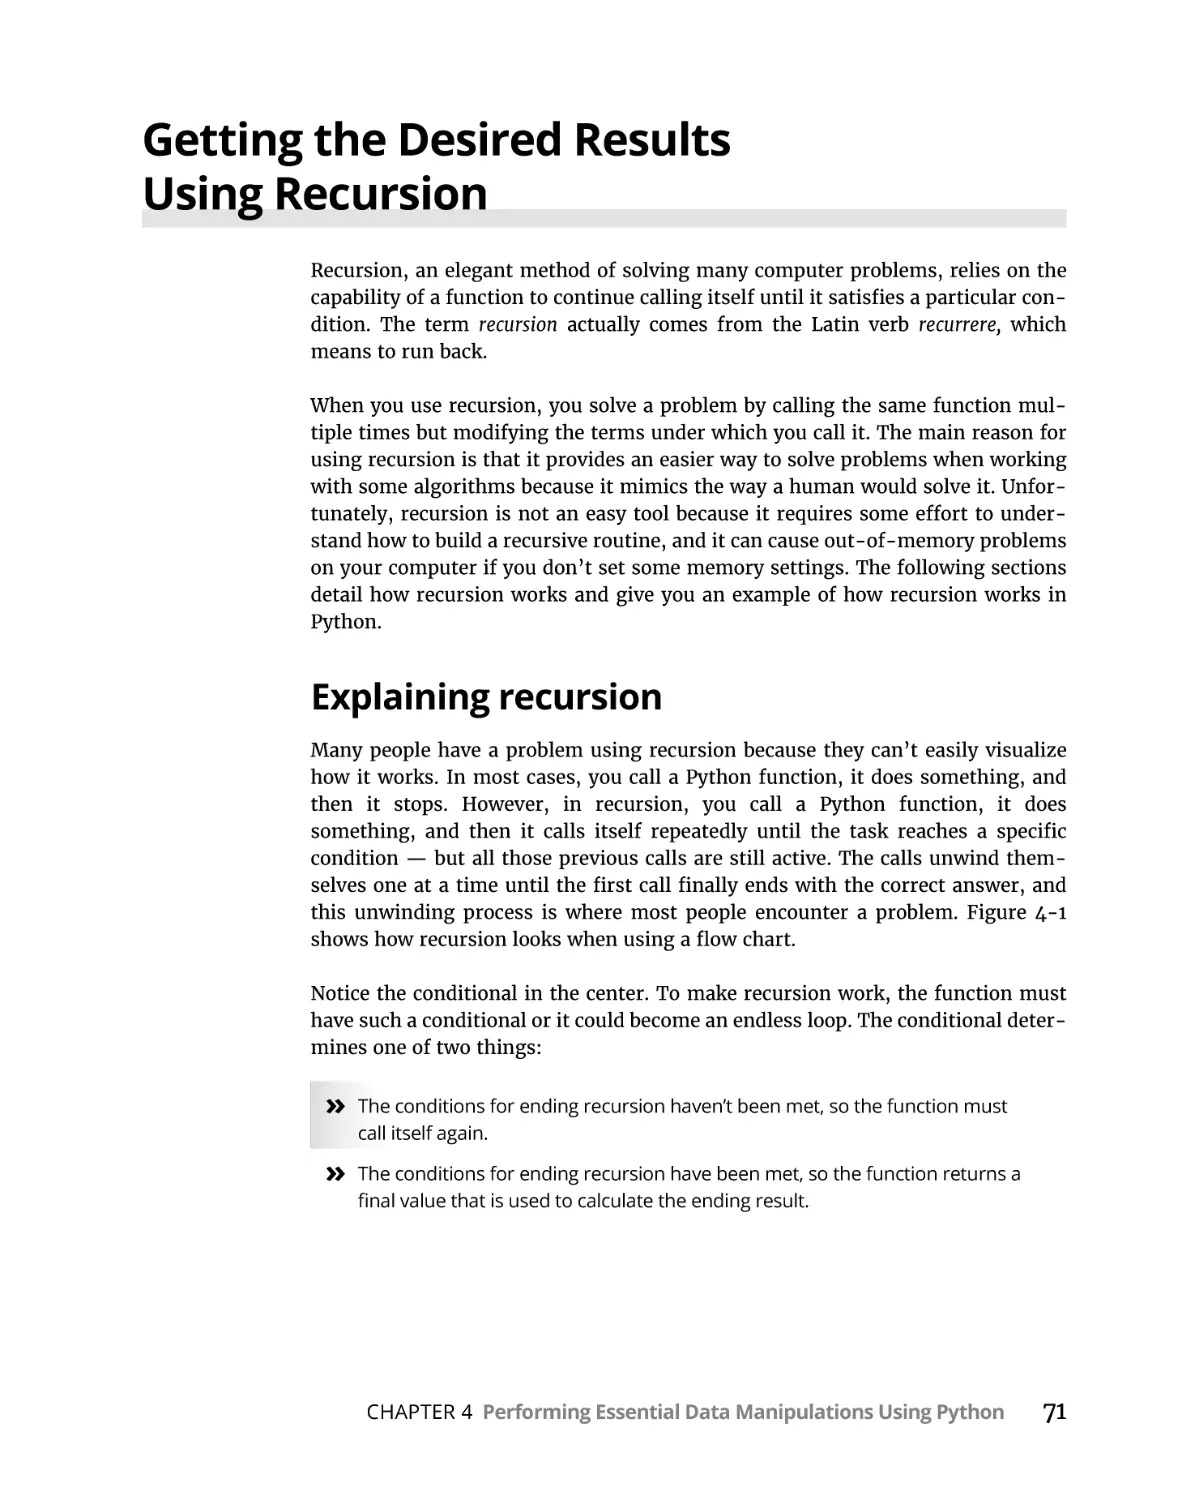 Getting the Desired Results Using Recursion
Explaining recursion